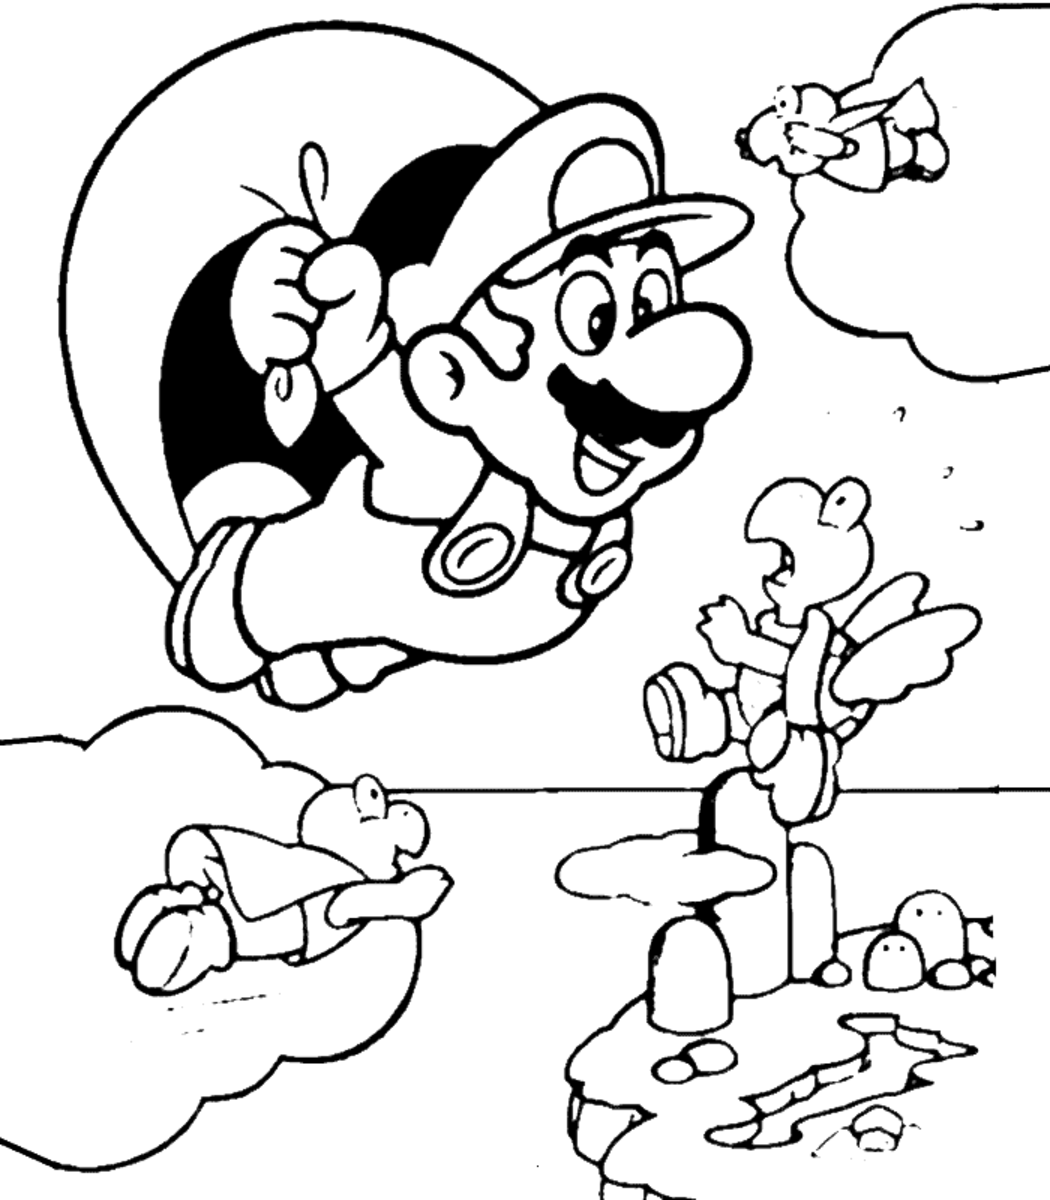 Mario and Luigi Printable Coloring Pages | HubPages